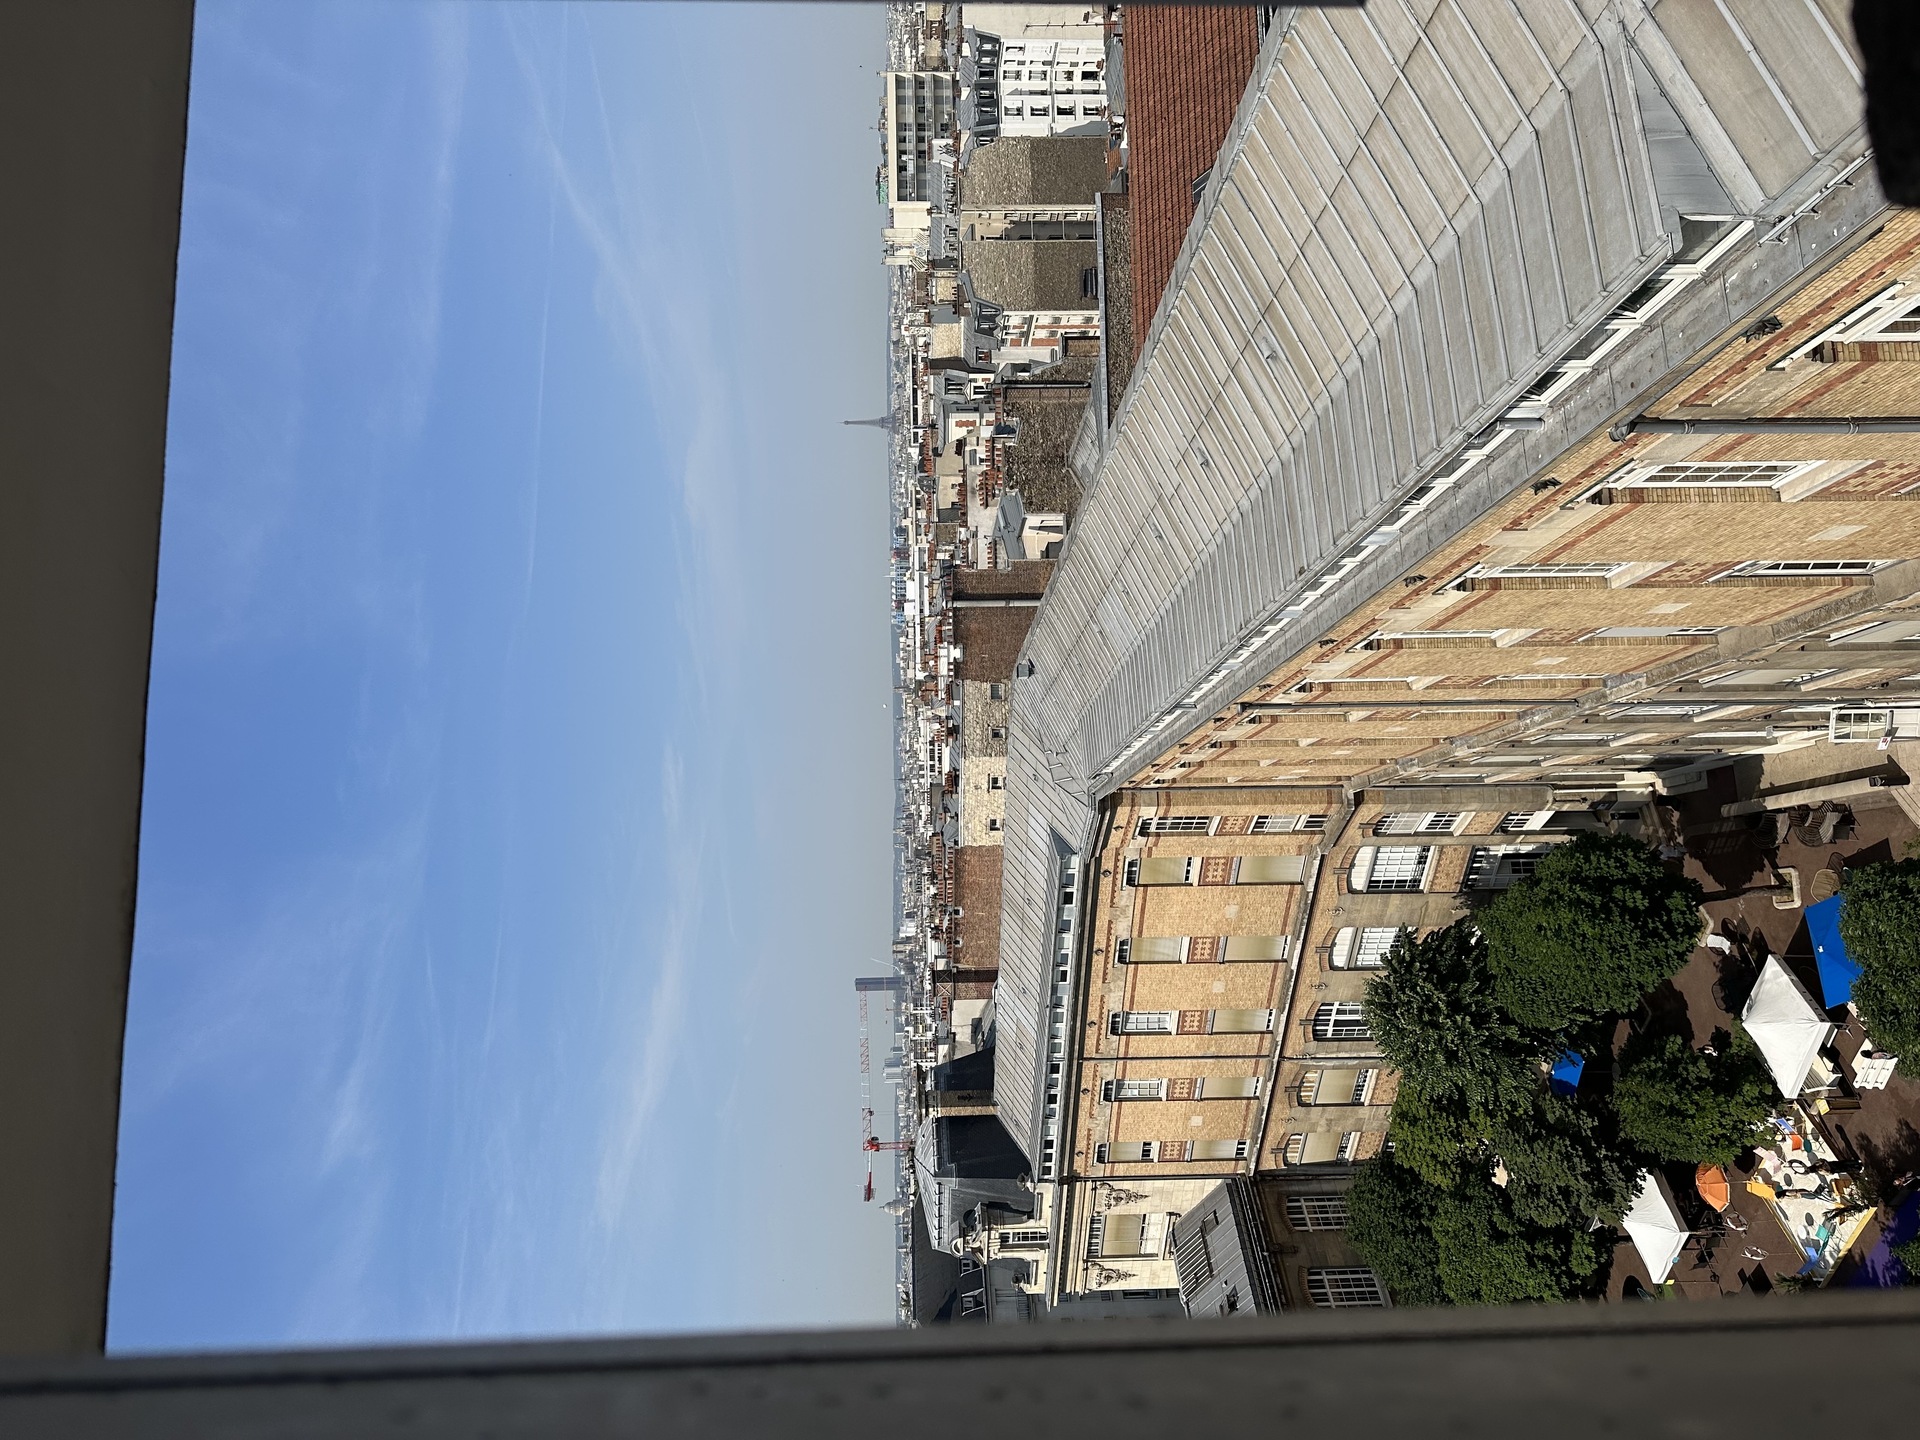 The famous Eiffel Tower can be seen from the windows of ESCP’s campus.